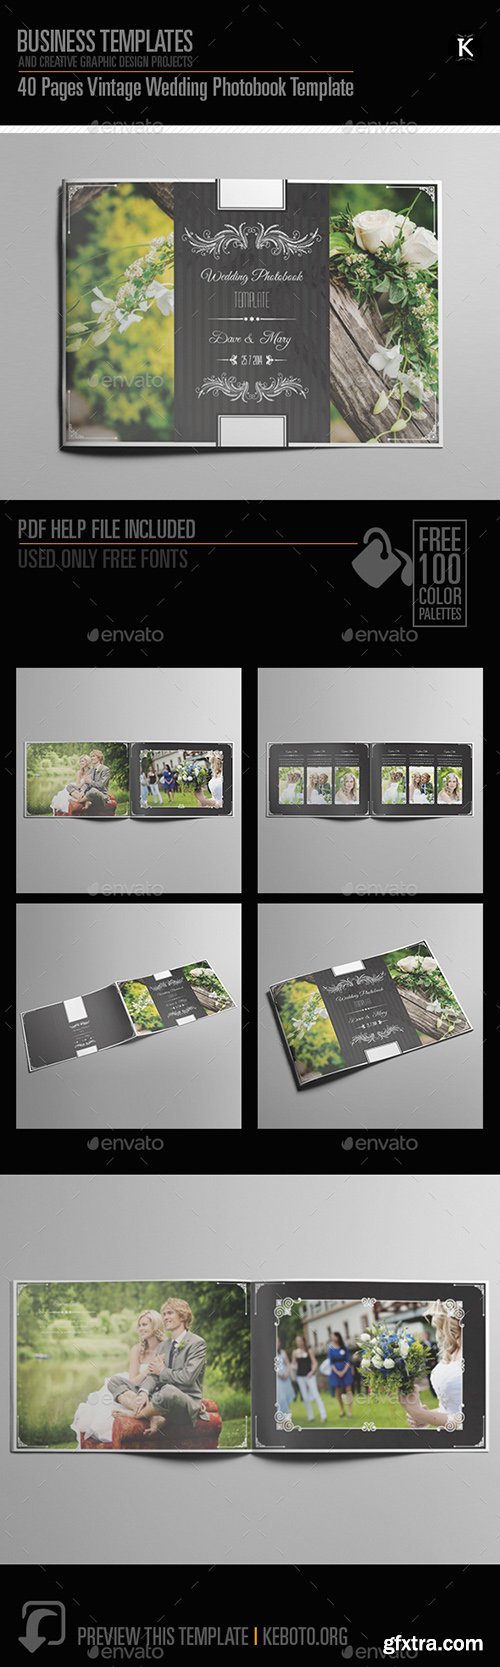 Graphicriver 40 Pages Vintage Wedding Photobook Template 8608300